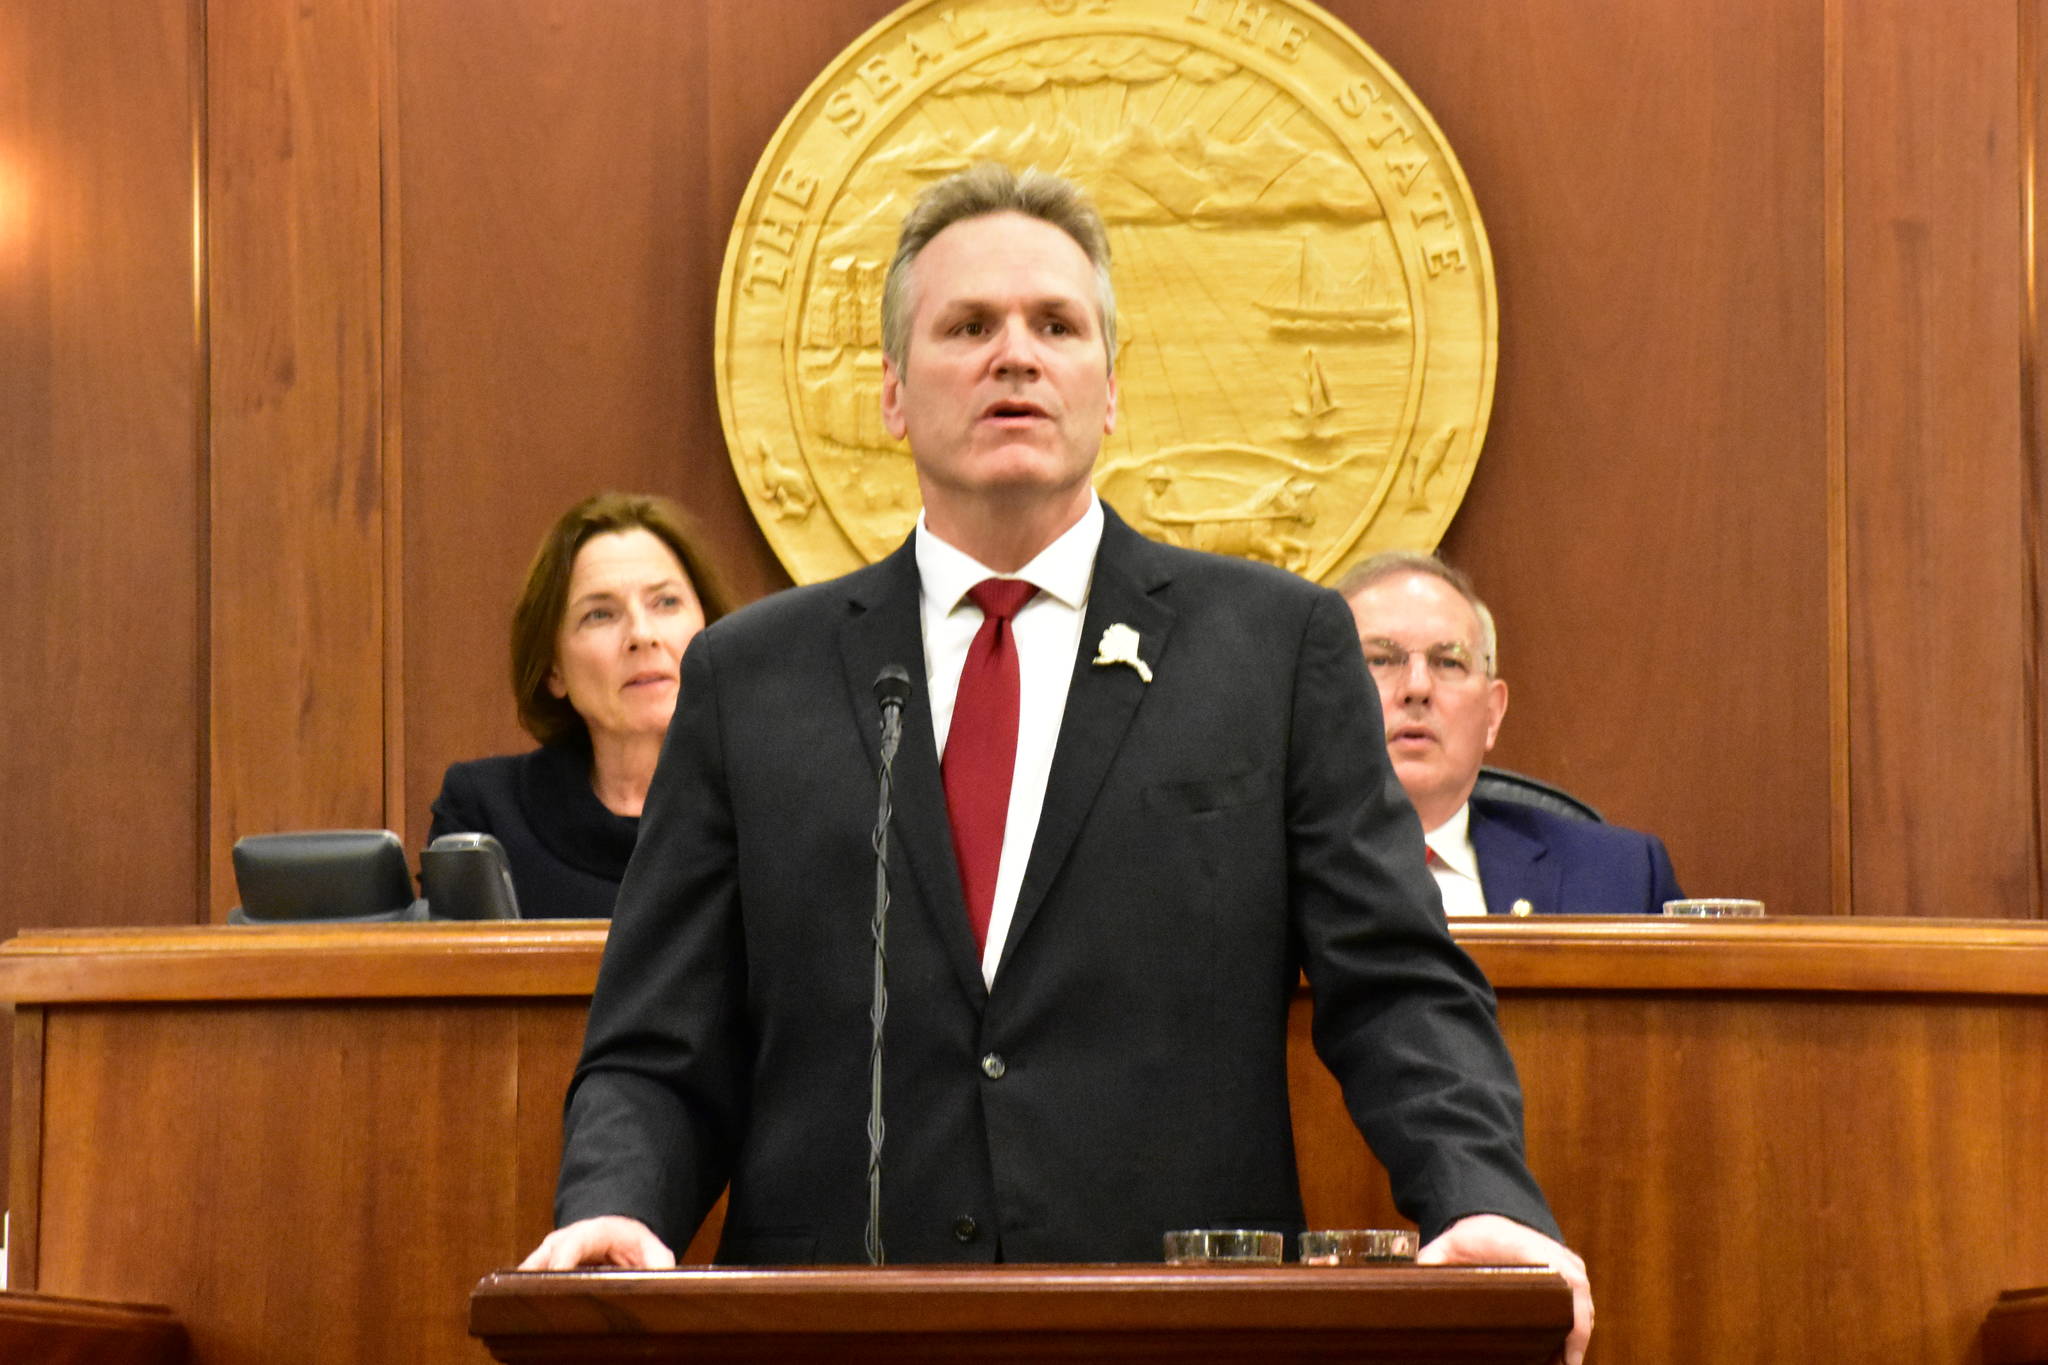 Gov. Mike Dunleavy give his State of the State address to a joint session of the Alaska Legislature on Monday. (Peter Segall | Juneau Empire)